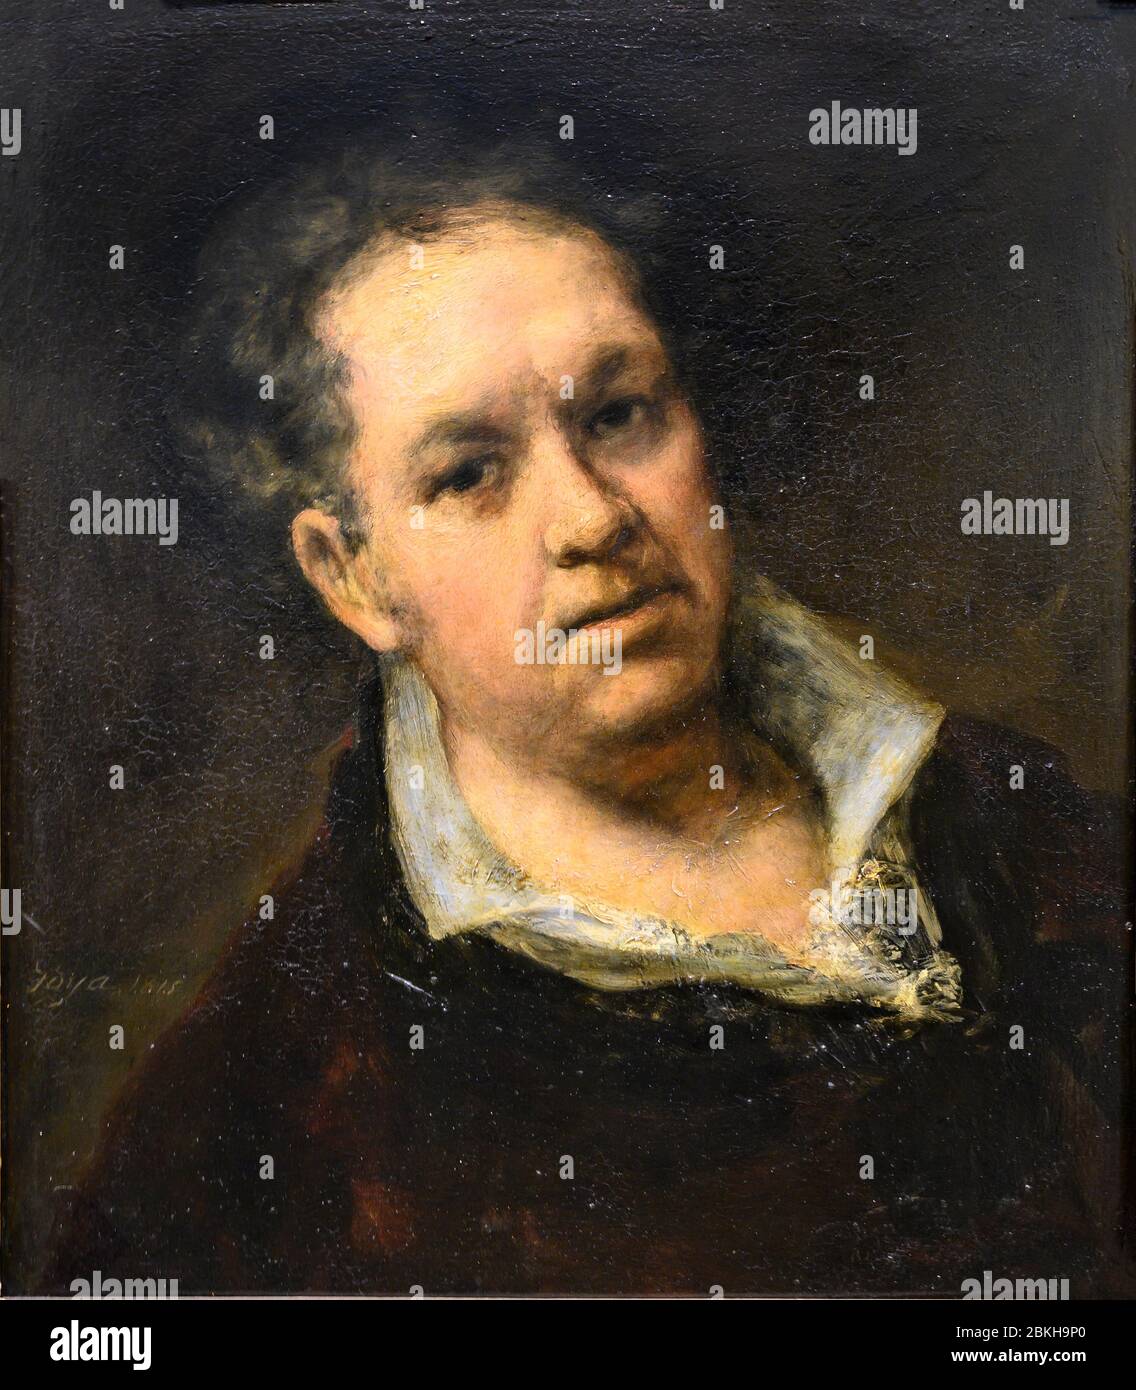 Self -portrait by Francisco José de Goya y Lucientes, painted in 1815 when he was aged 69. in the San Fernando Royal Academy of Fine Arts, Madrid, Spa Stock Photo